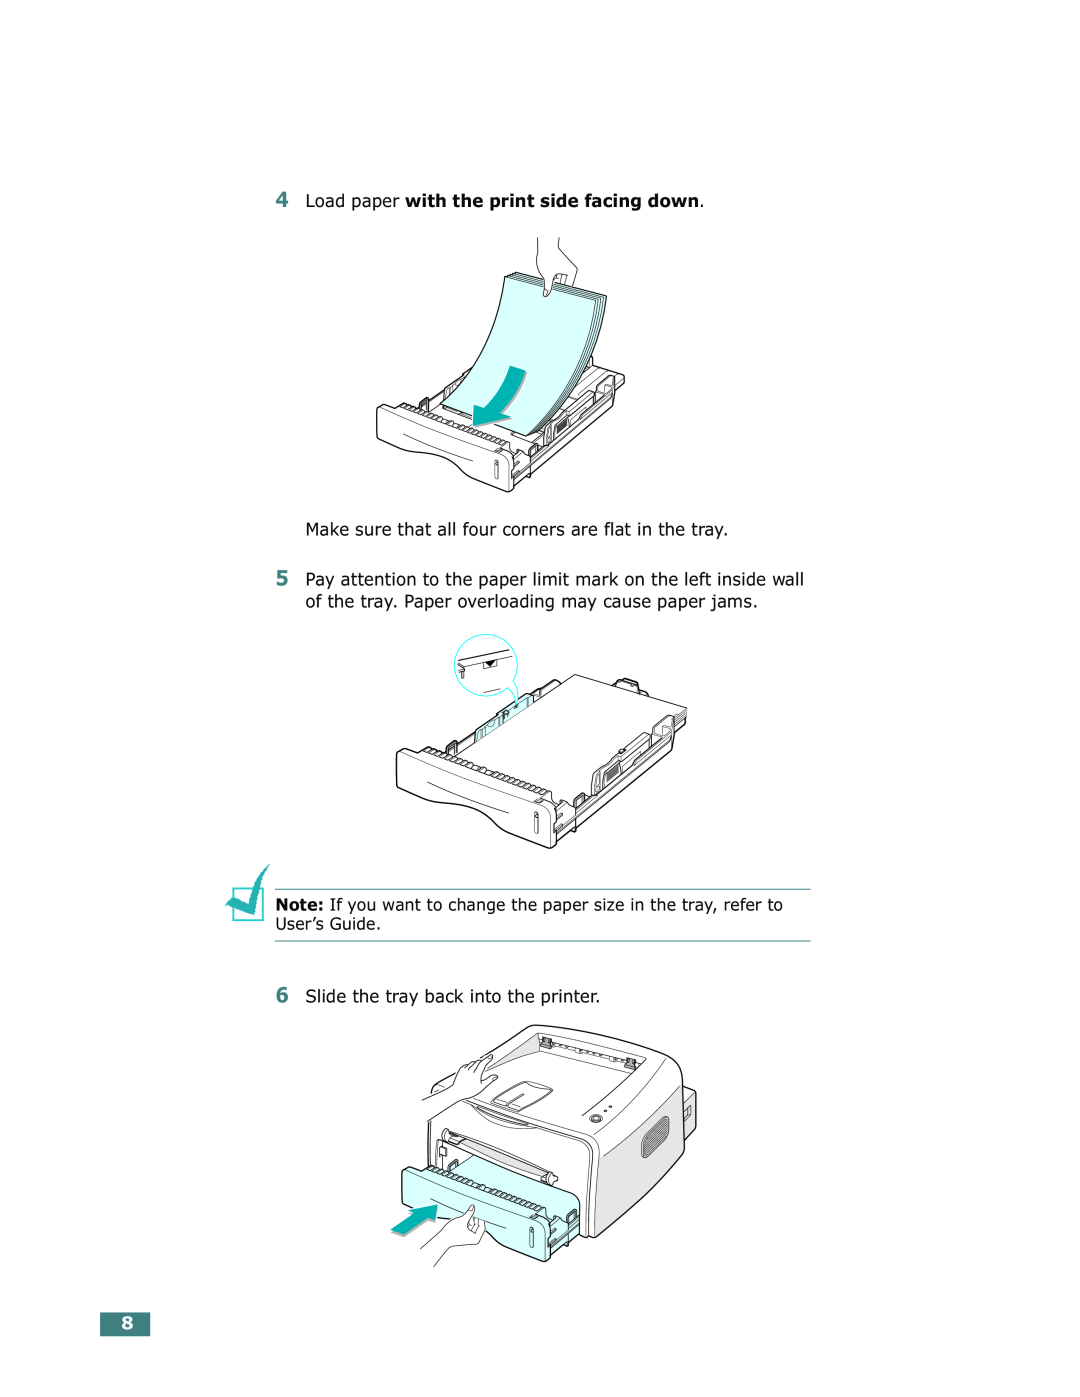 Xerox Phaser 3130 manual Load paper with the print side facing down, Make sure that all four corners are flat in the tray 